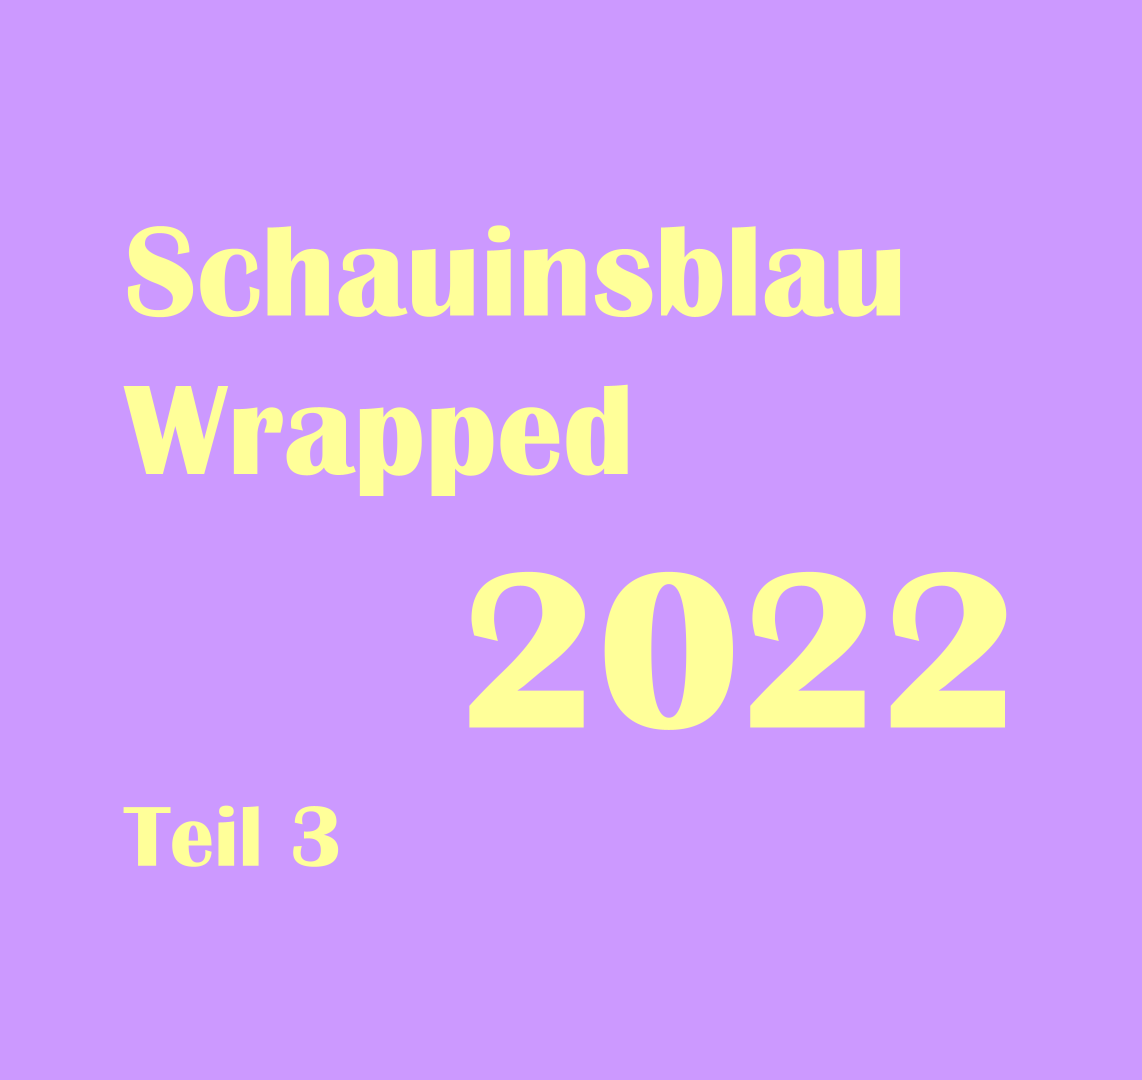 You are currently viewing Schauinsblau Wrapped Teil 3